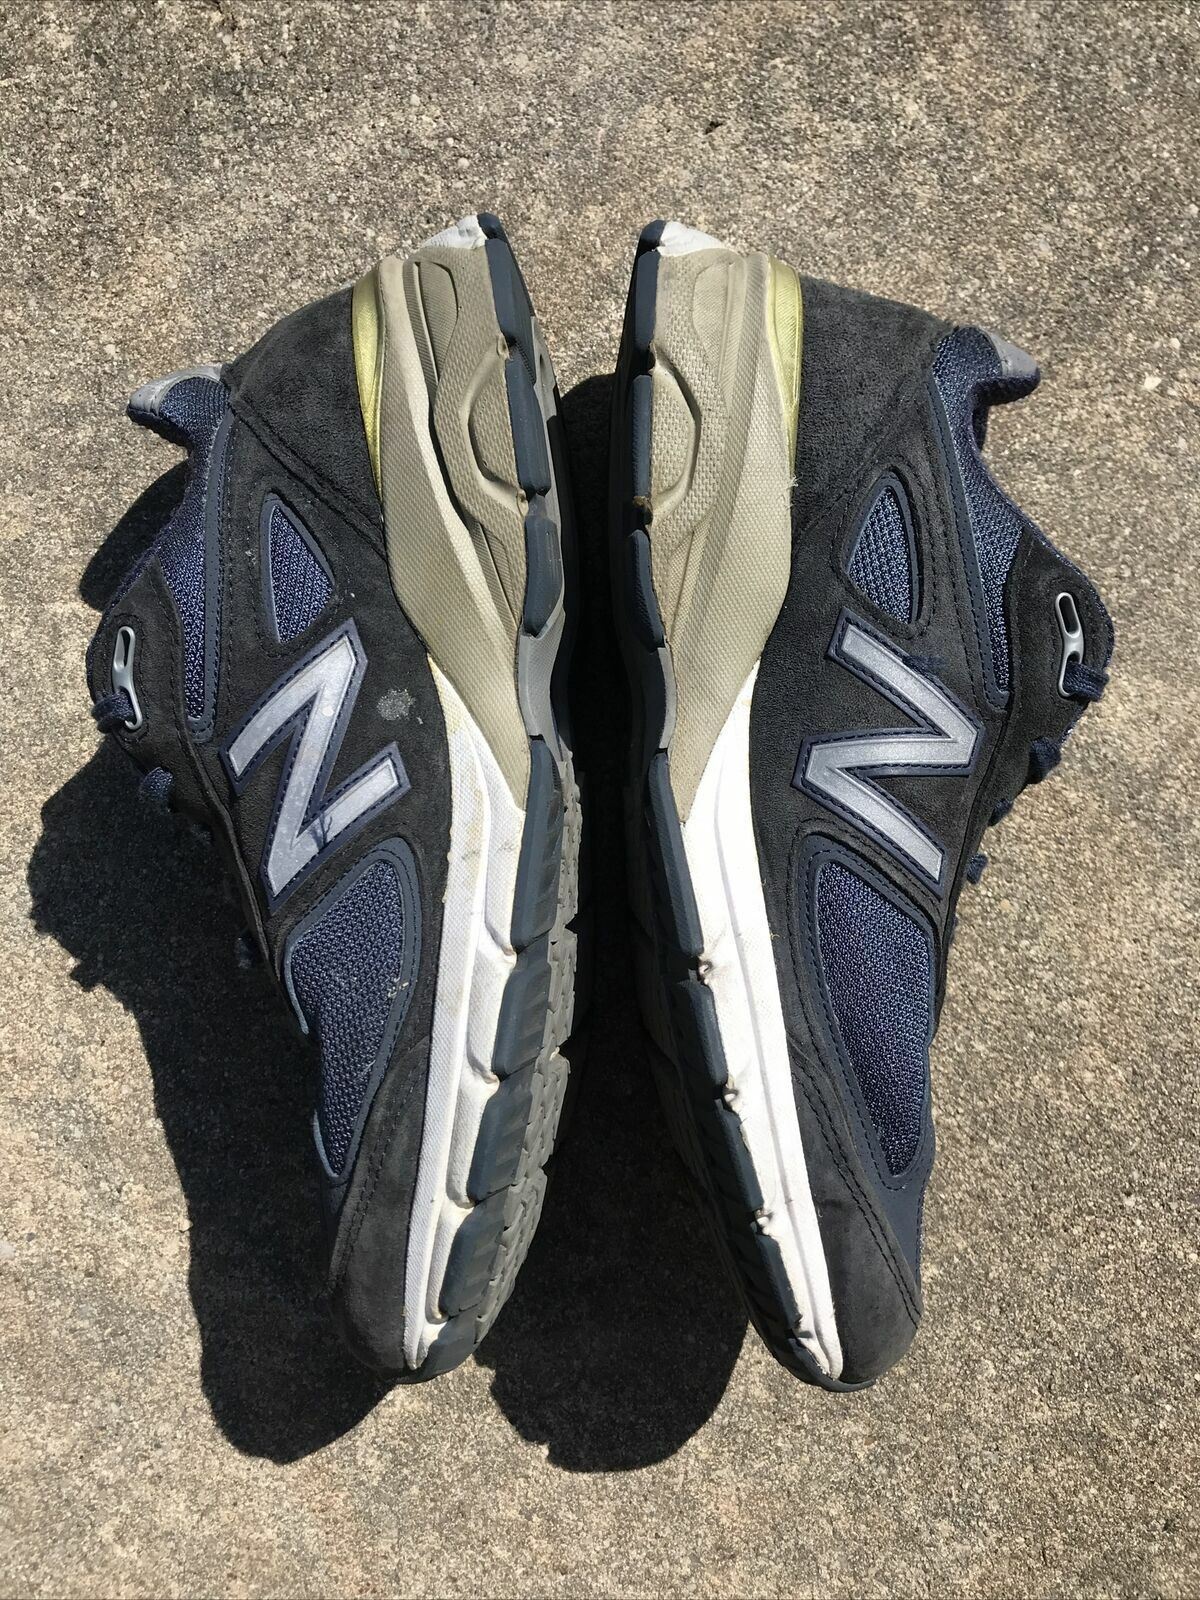 New Balance 990v4 M990NV4 Navy Suede Made In USA Size 9 Mens Casual Shoes